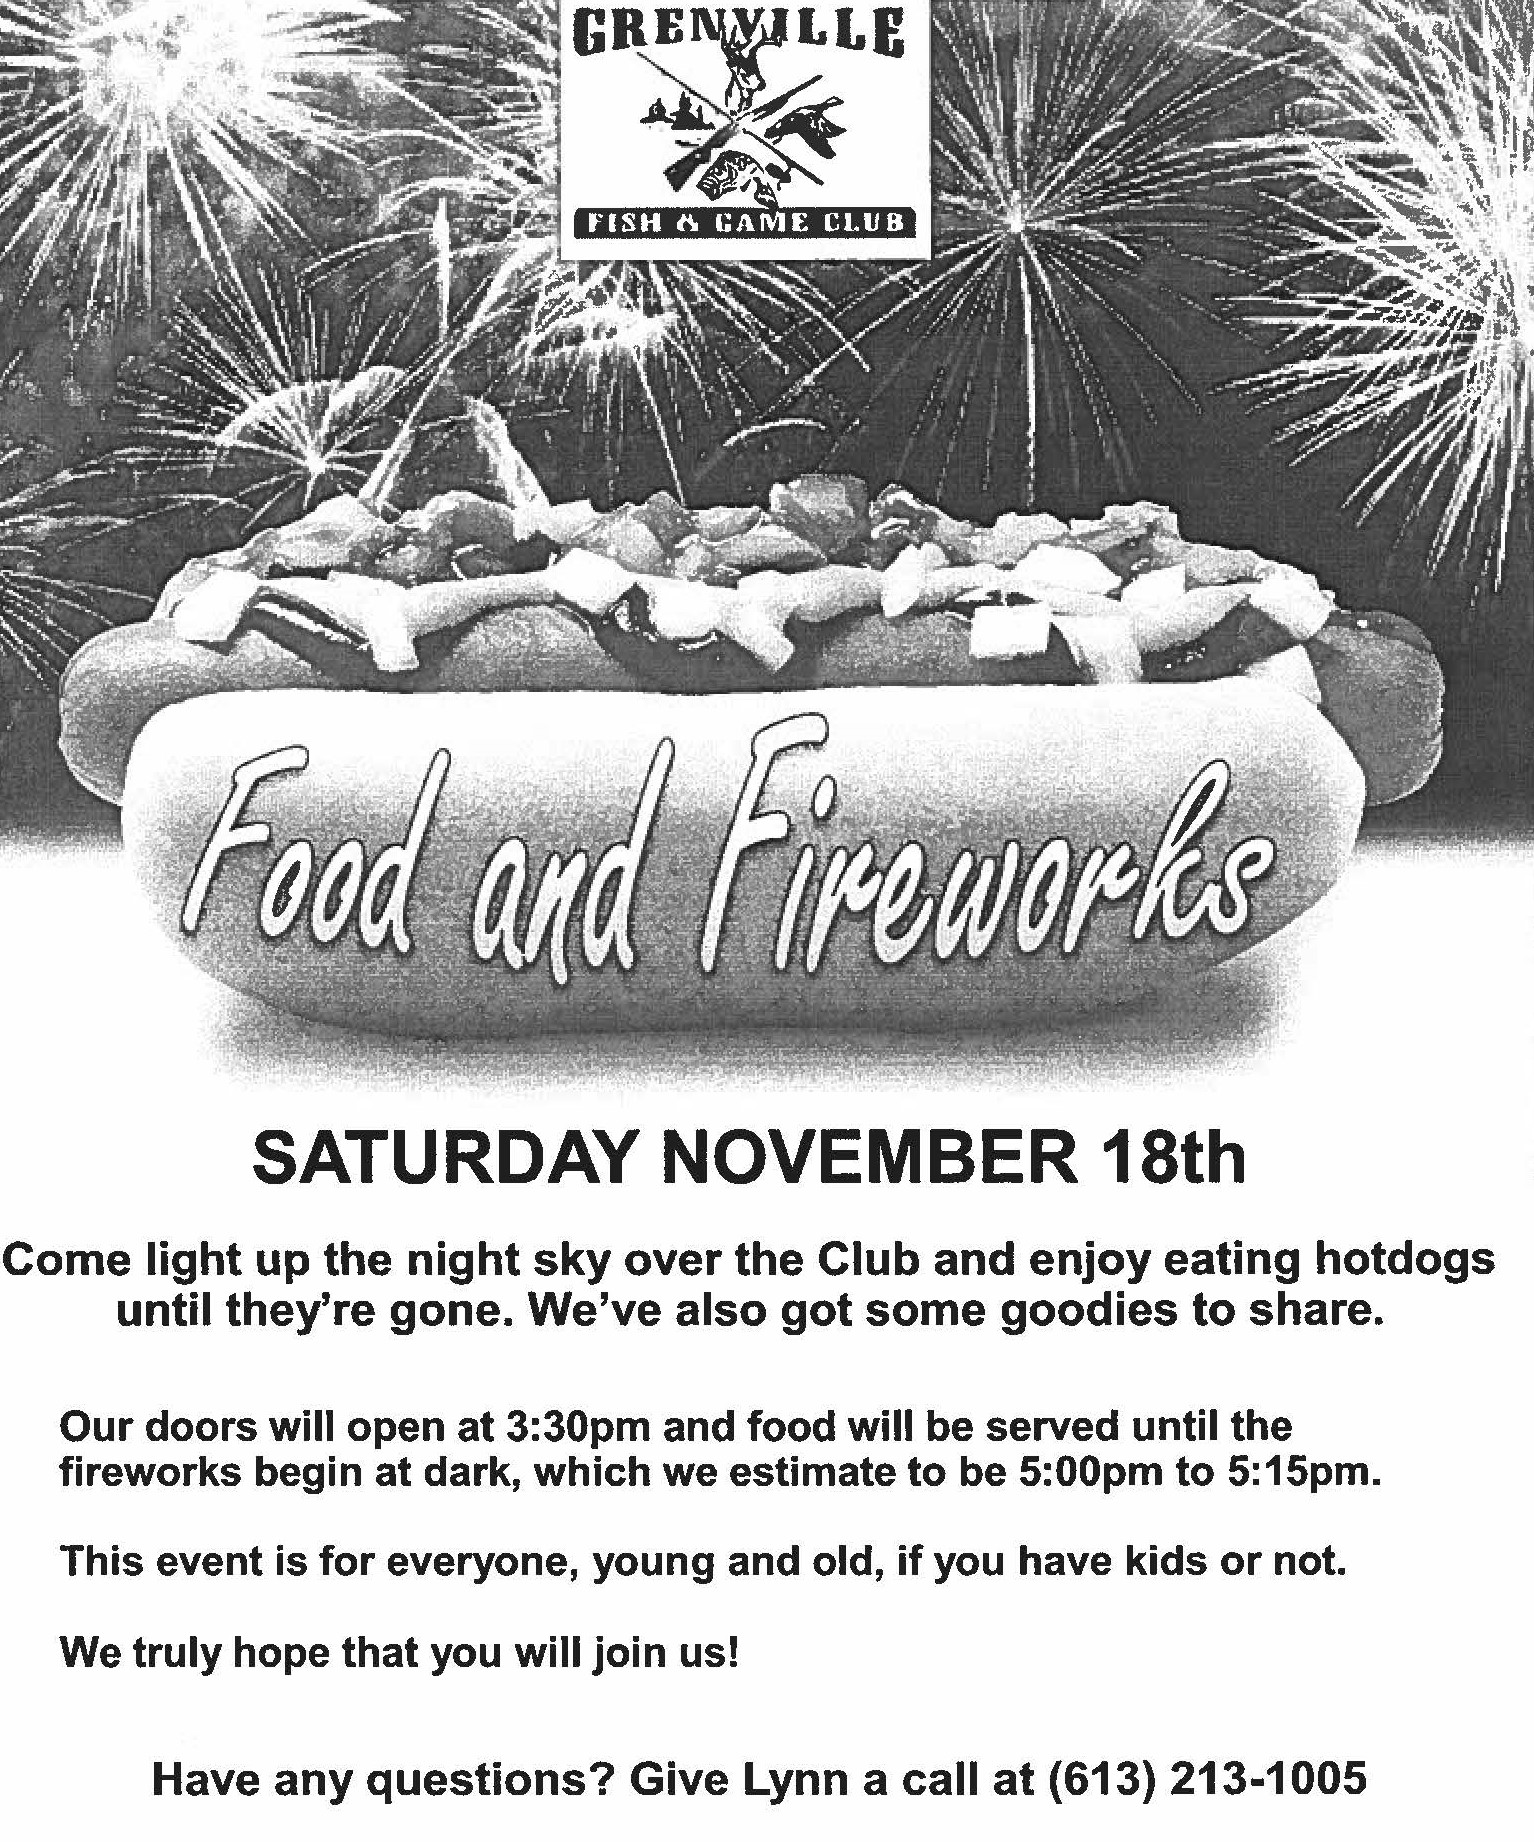 Grenville Fish & Game Club Food & Fireworks @ Grenville Fish & Game Club | Ontario | Canada